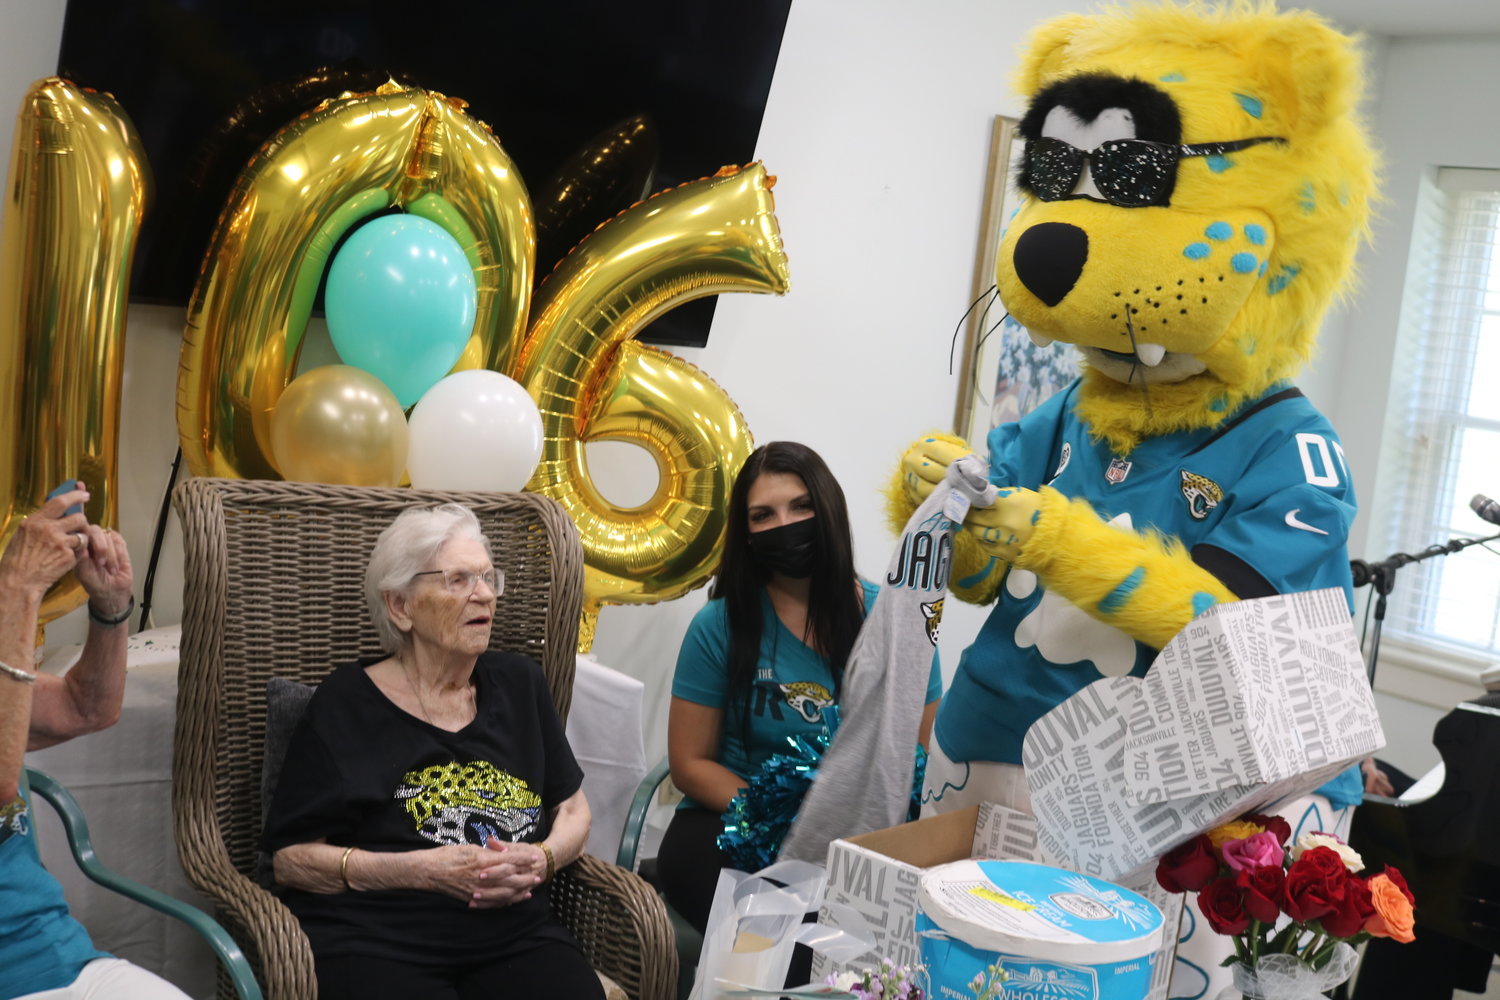 Muriel McGowan celebrated her 106th birthday at Vicar’s Landing with family, friends and a surprise visit by Jacksonville Jaguars mascot Jaxson de Ville and members of the ROAR cheerleaders. She considers herself the team’s No. 1 fan.